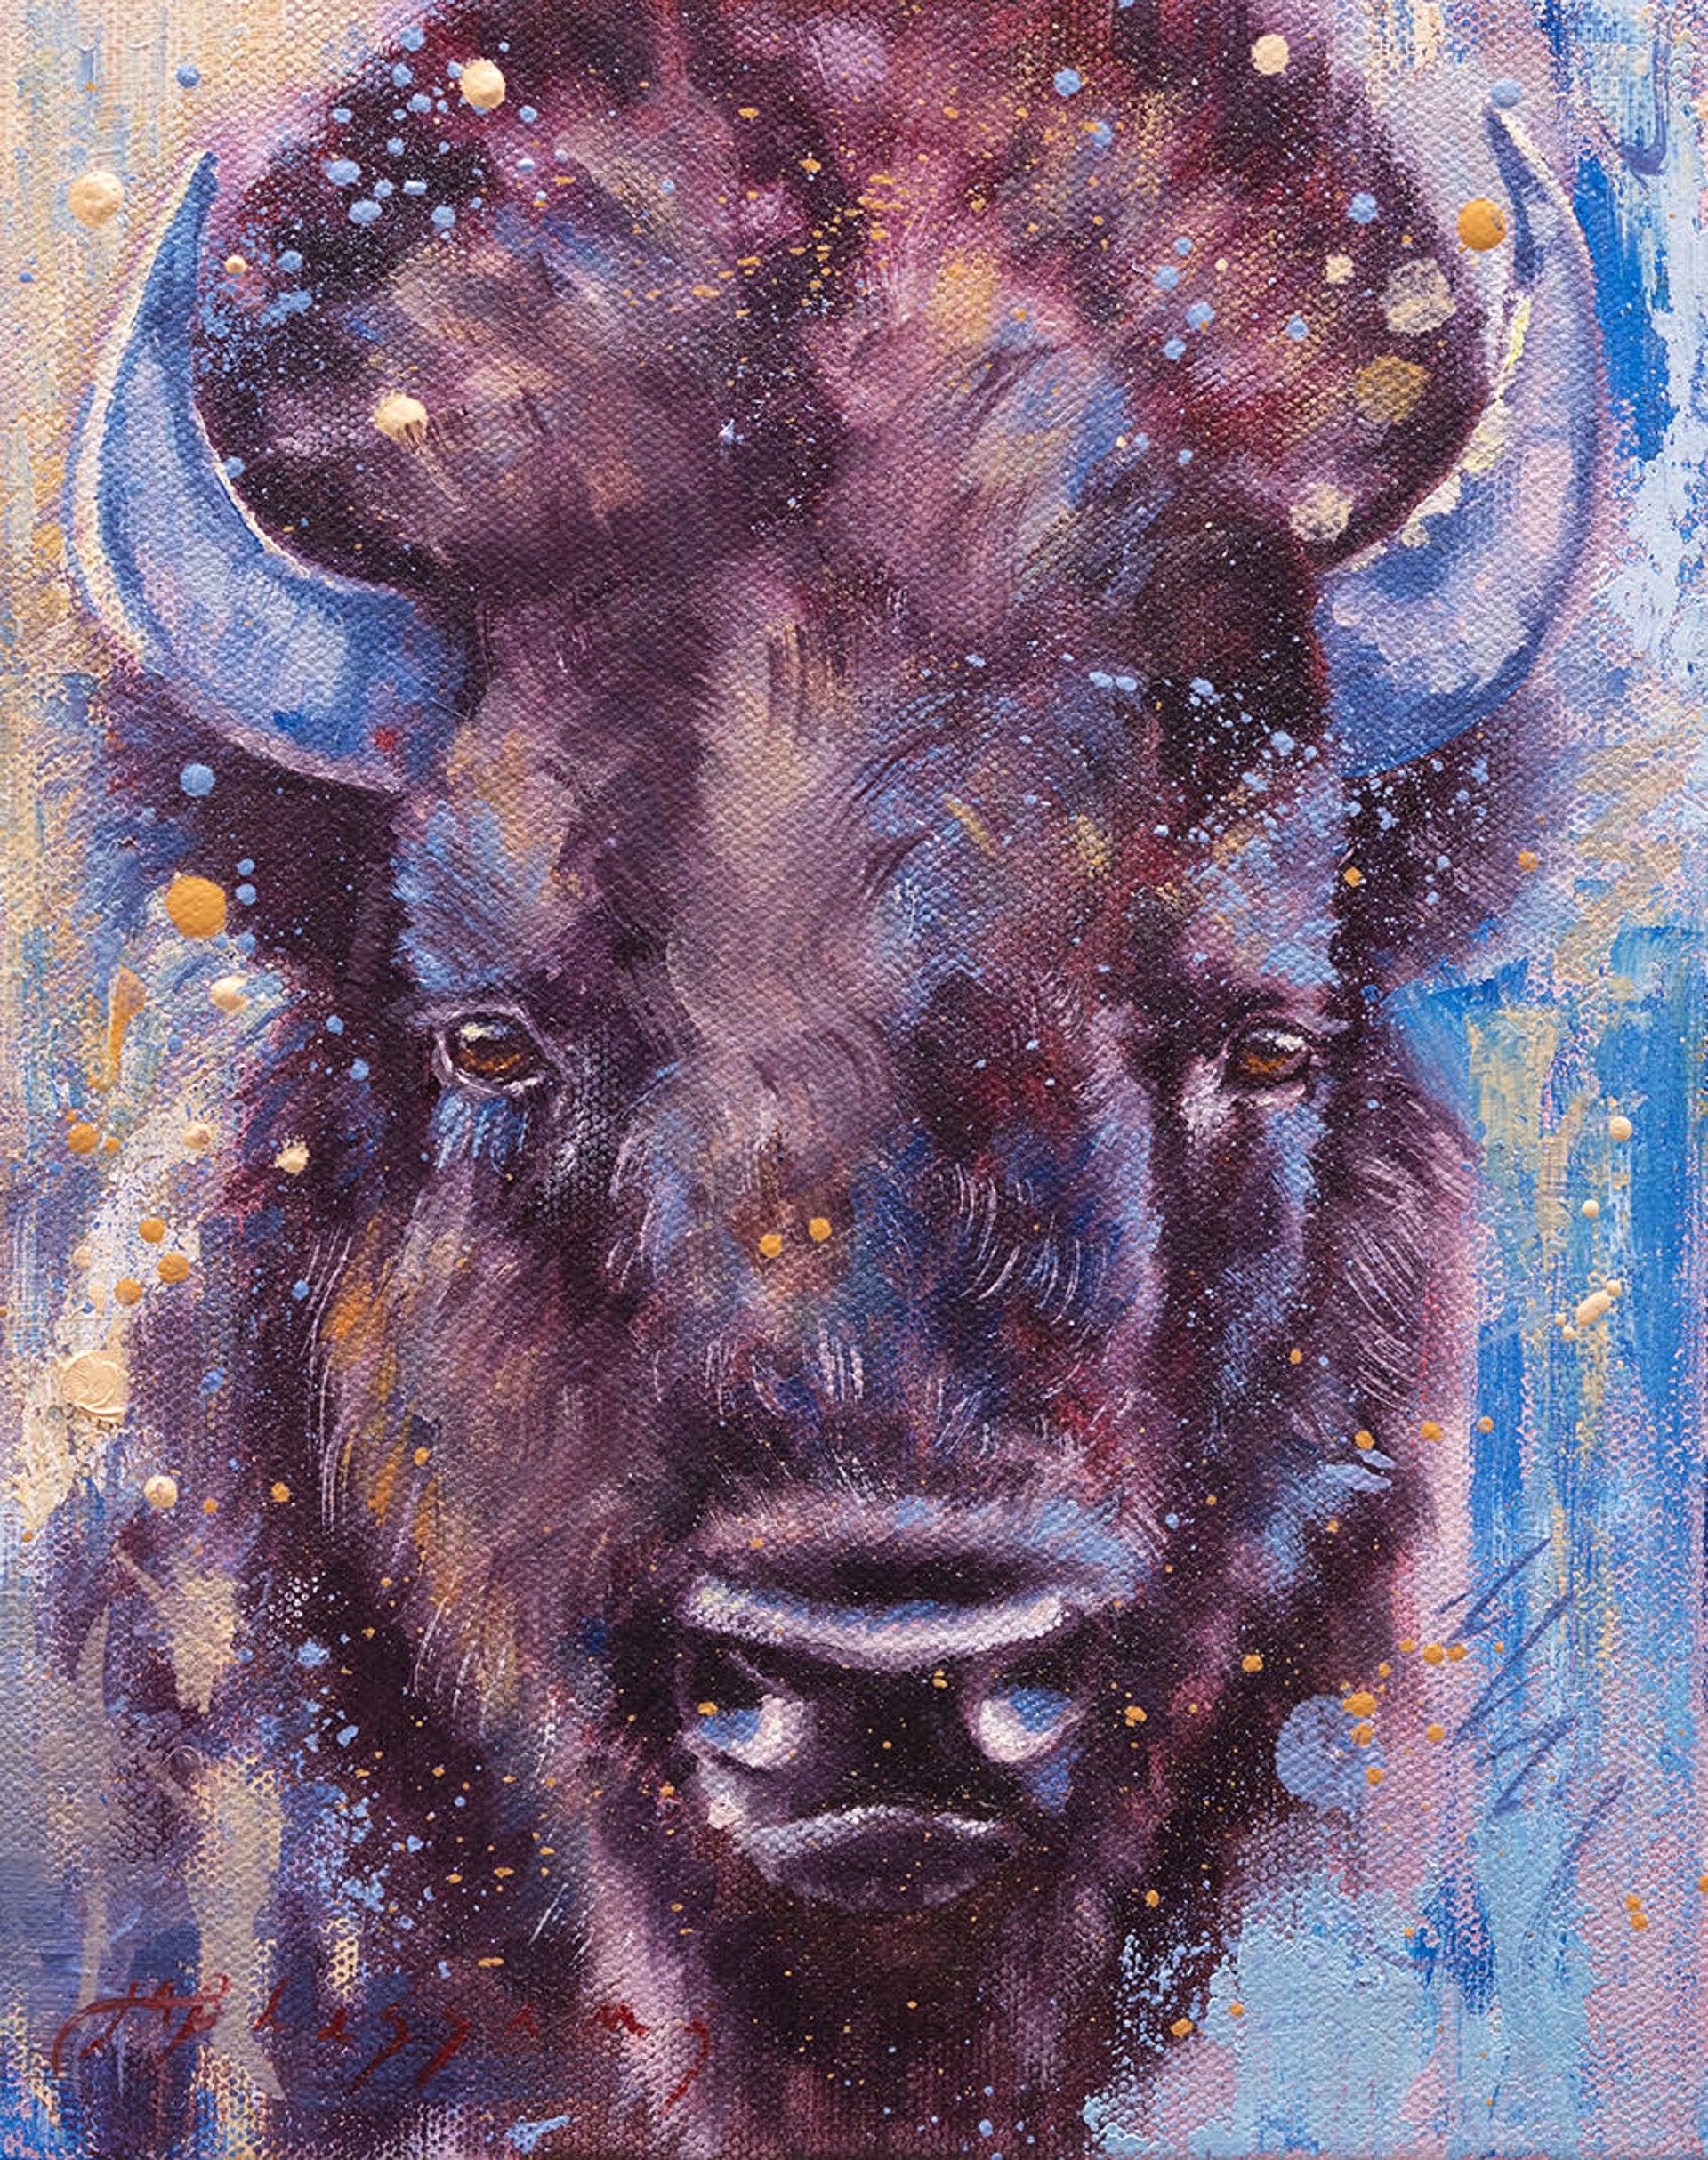 Contemporary Painting Of A Bison Face Colors Mostly Blue Purple In A Contemporary Style, By Meagan Blessing